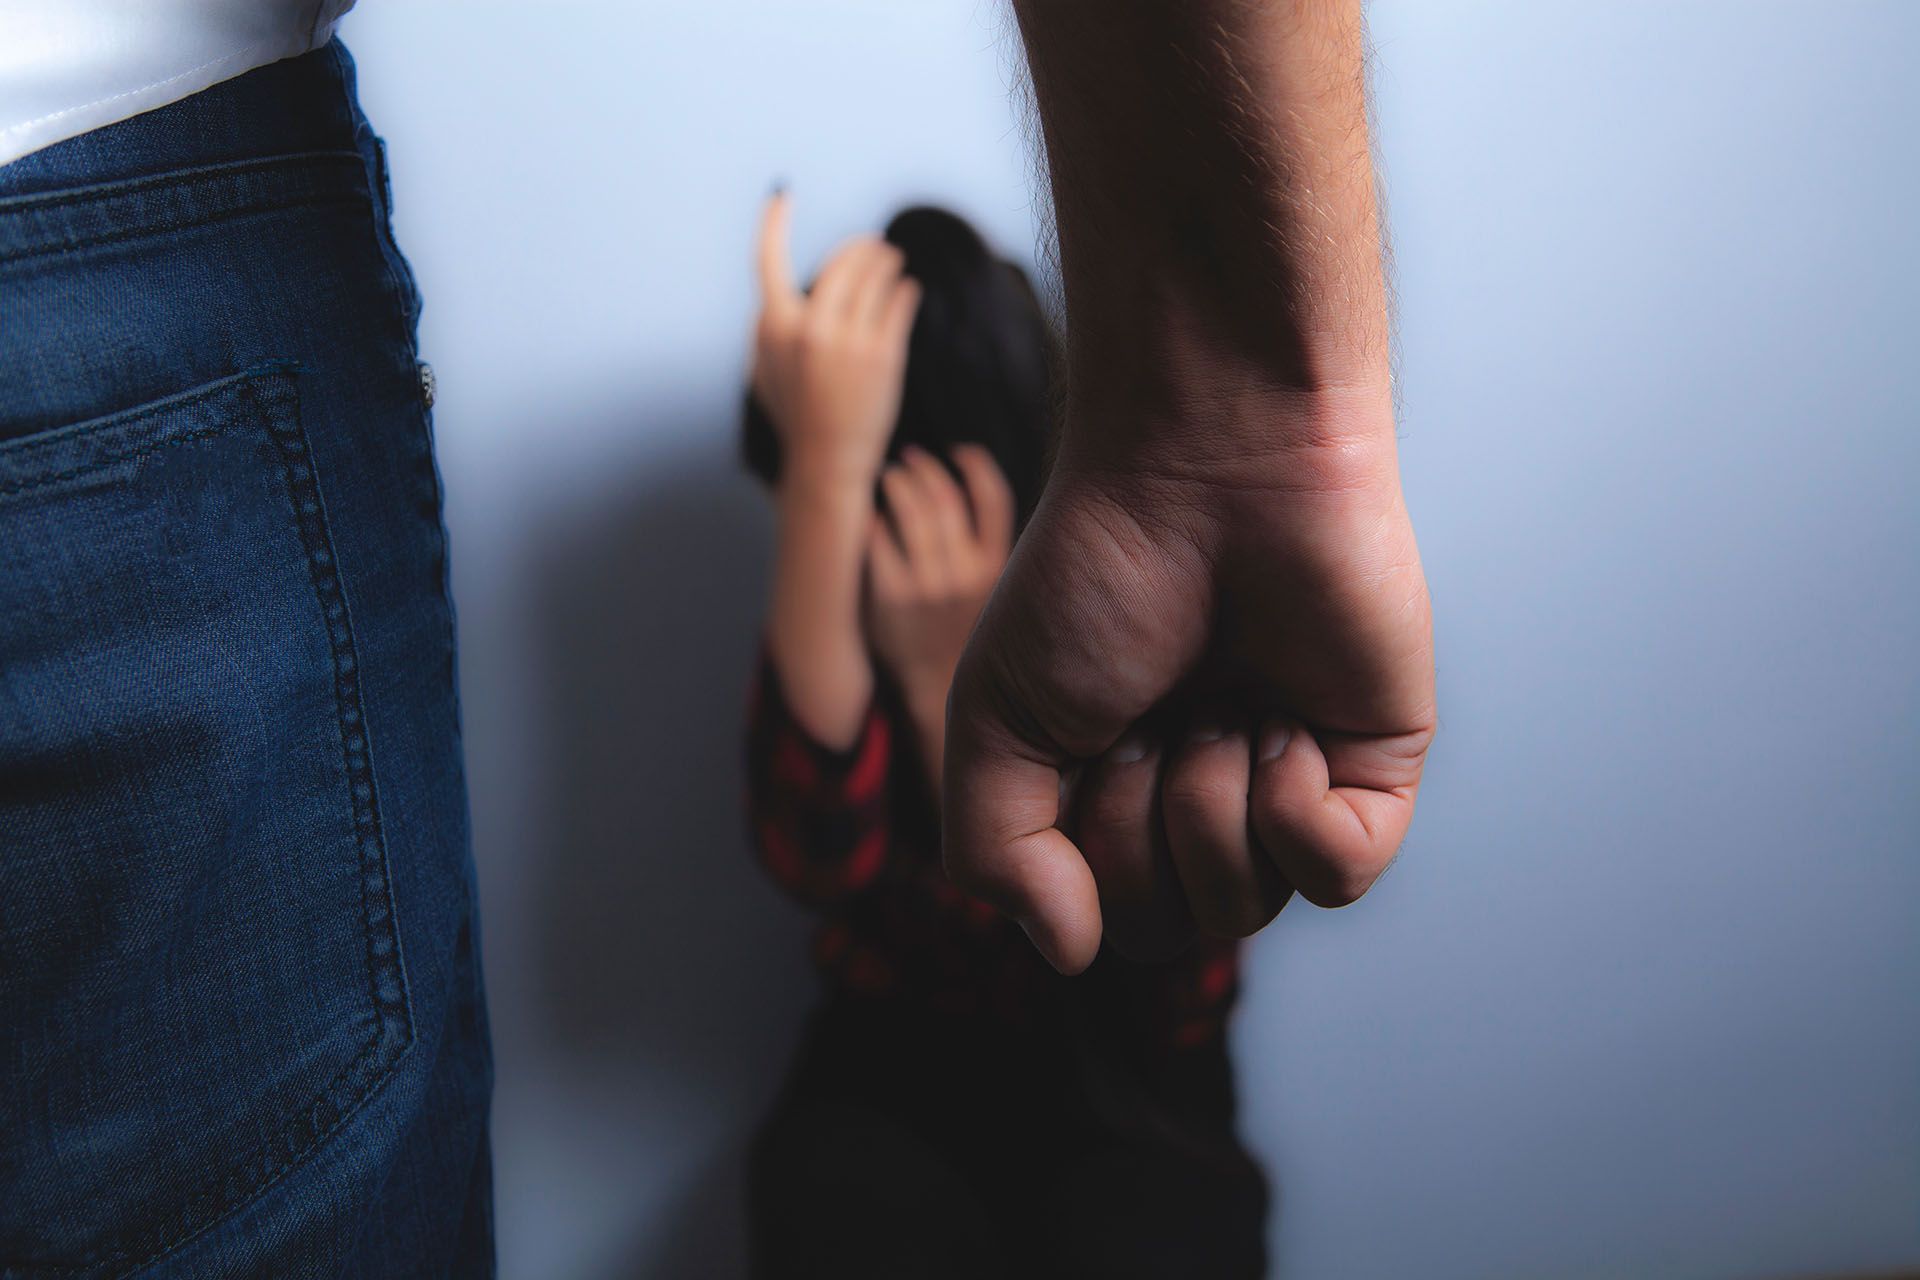 A man is holding a child 's hand in front of a wall.